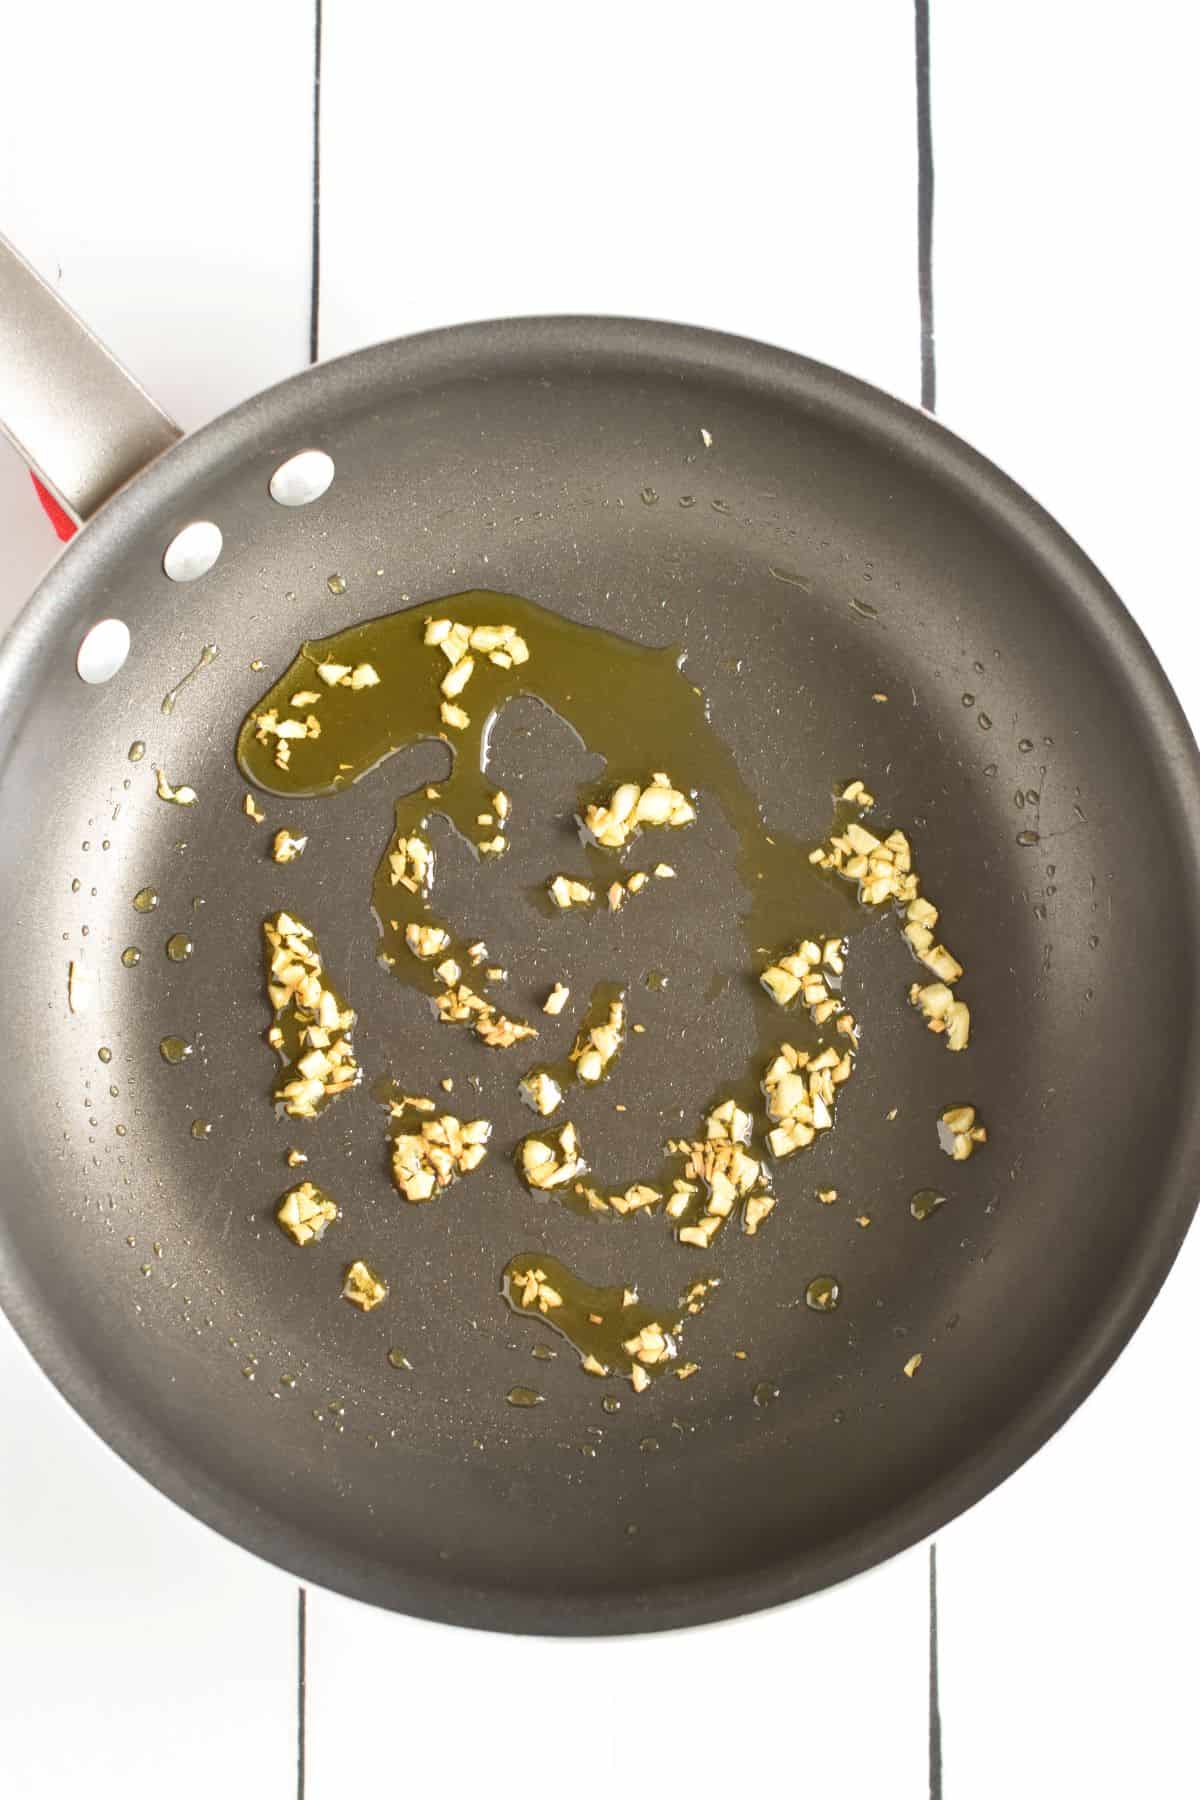 cooked garlic in a nonstick pan with olive oil.